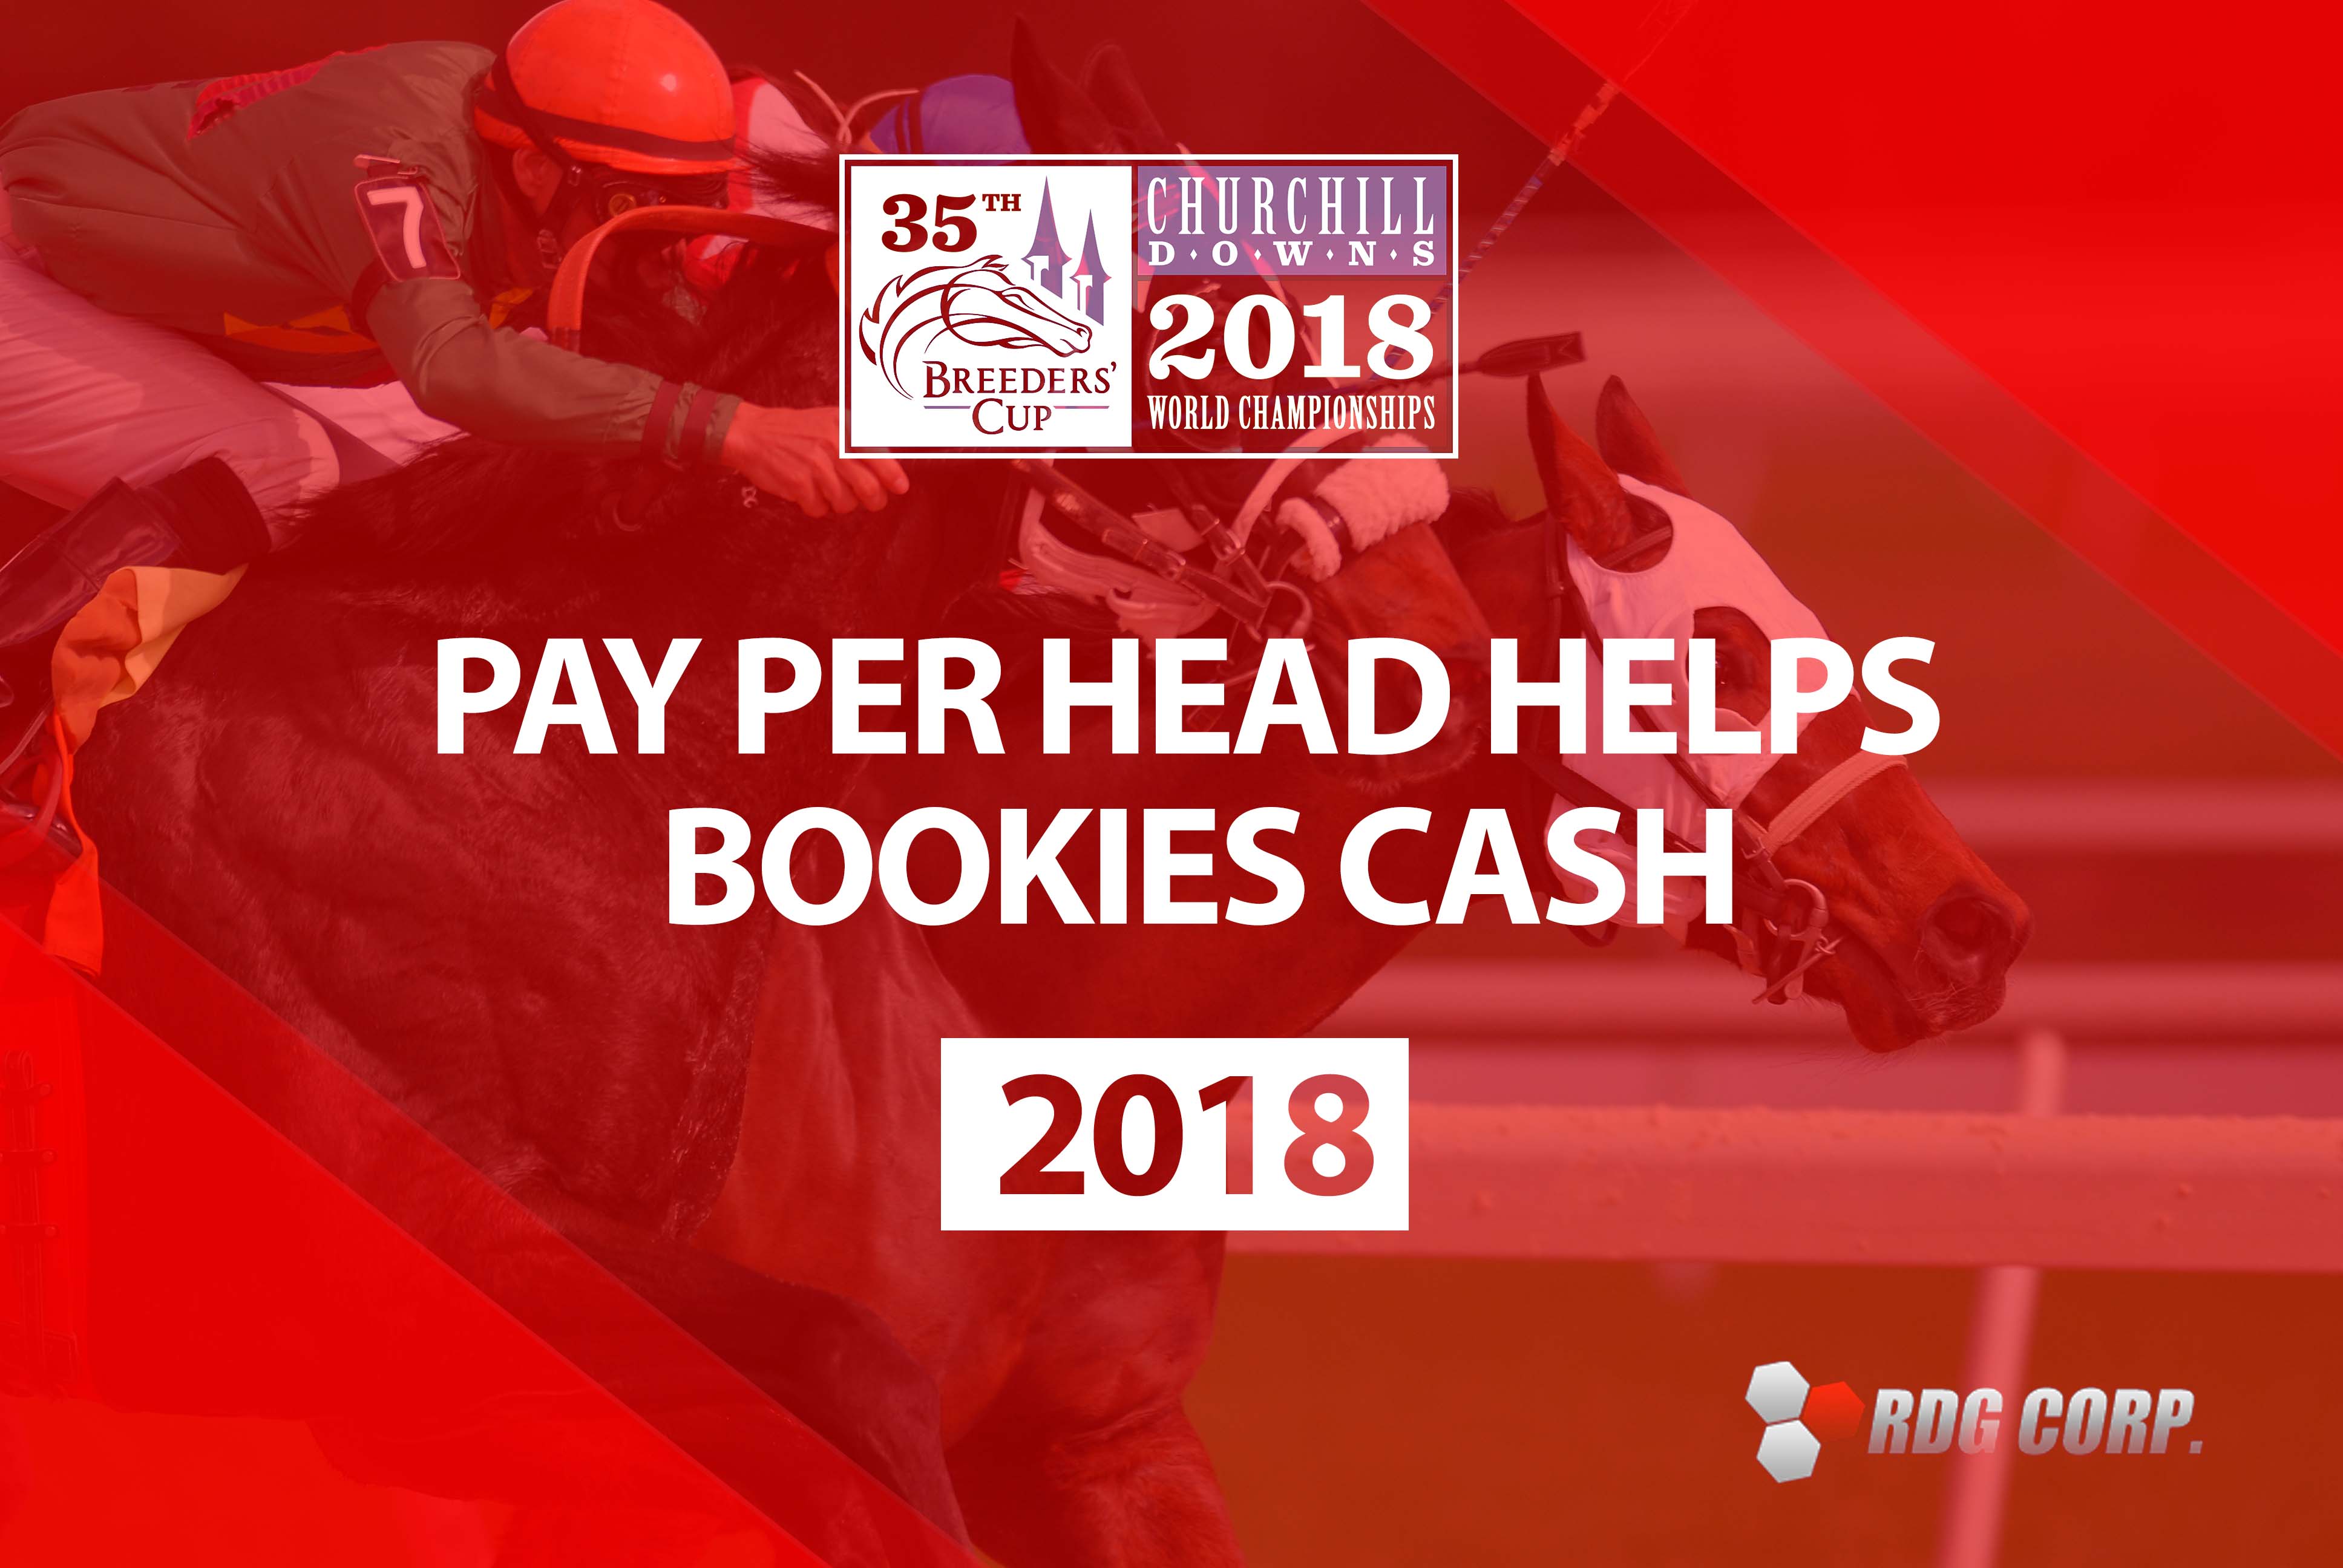 Pay Per Head Helps Bookies Cash In on the Breeders’ Cup